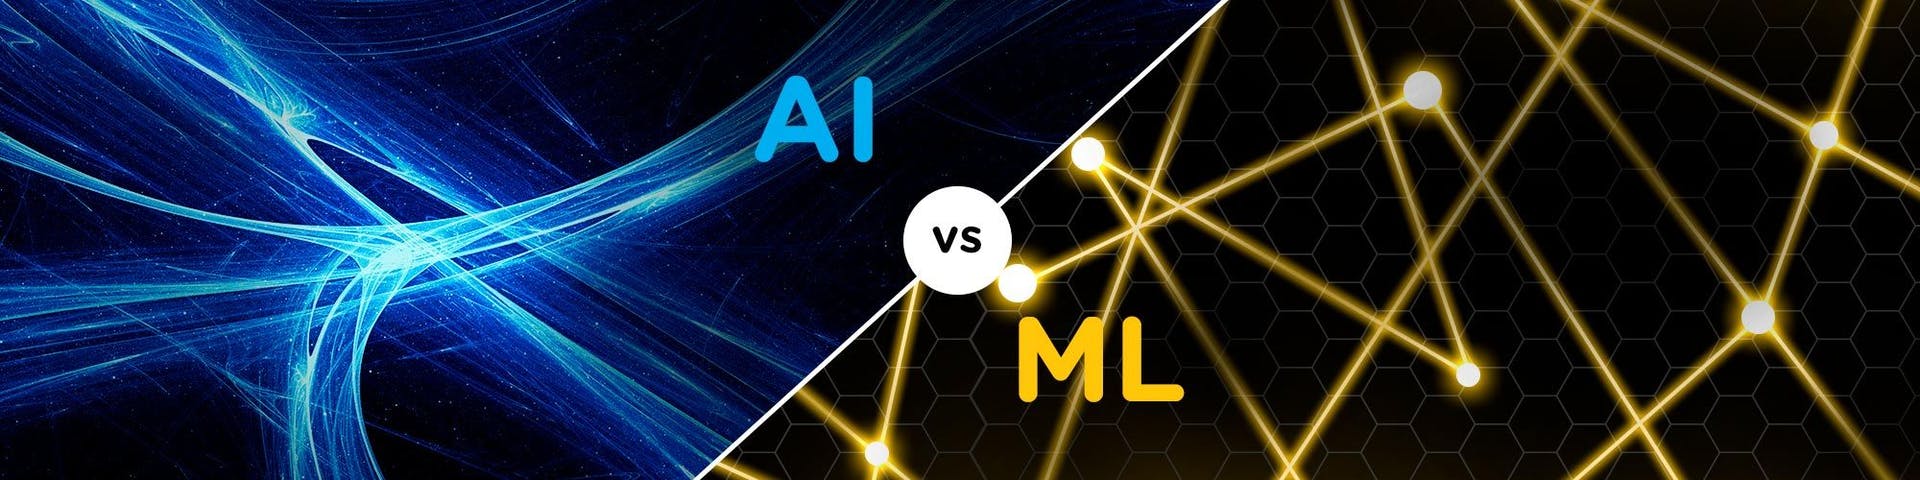 AI vs ML – What’s the Difference Between Artificial Intelligence and Machine Learning?